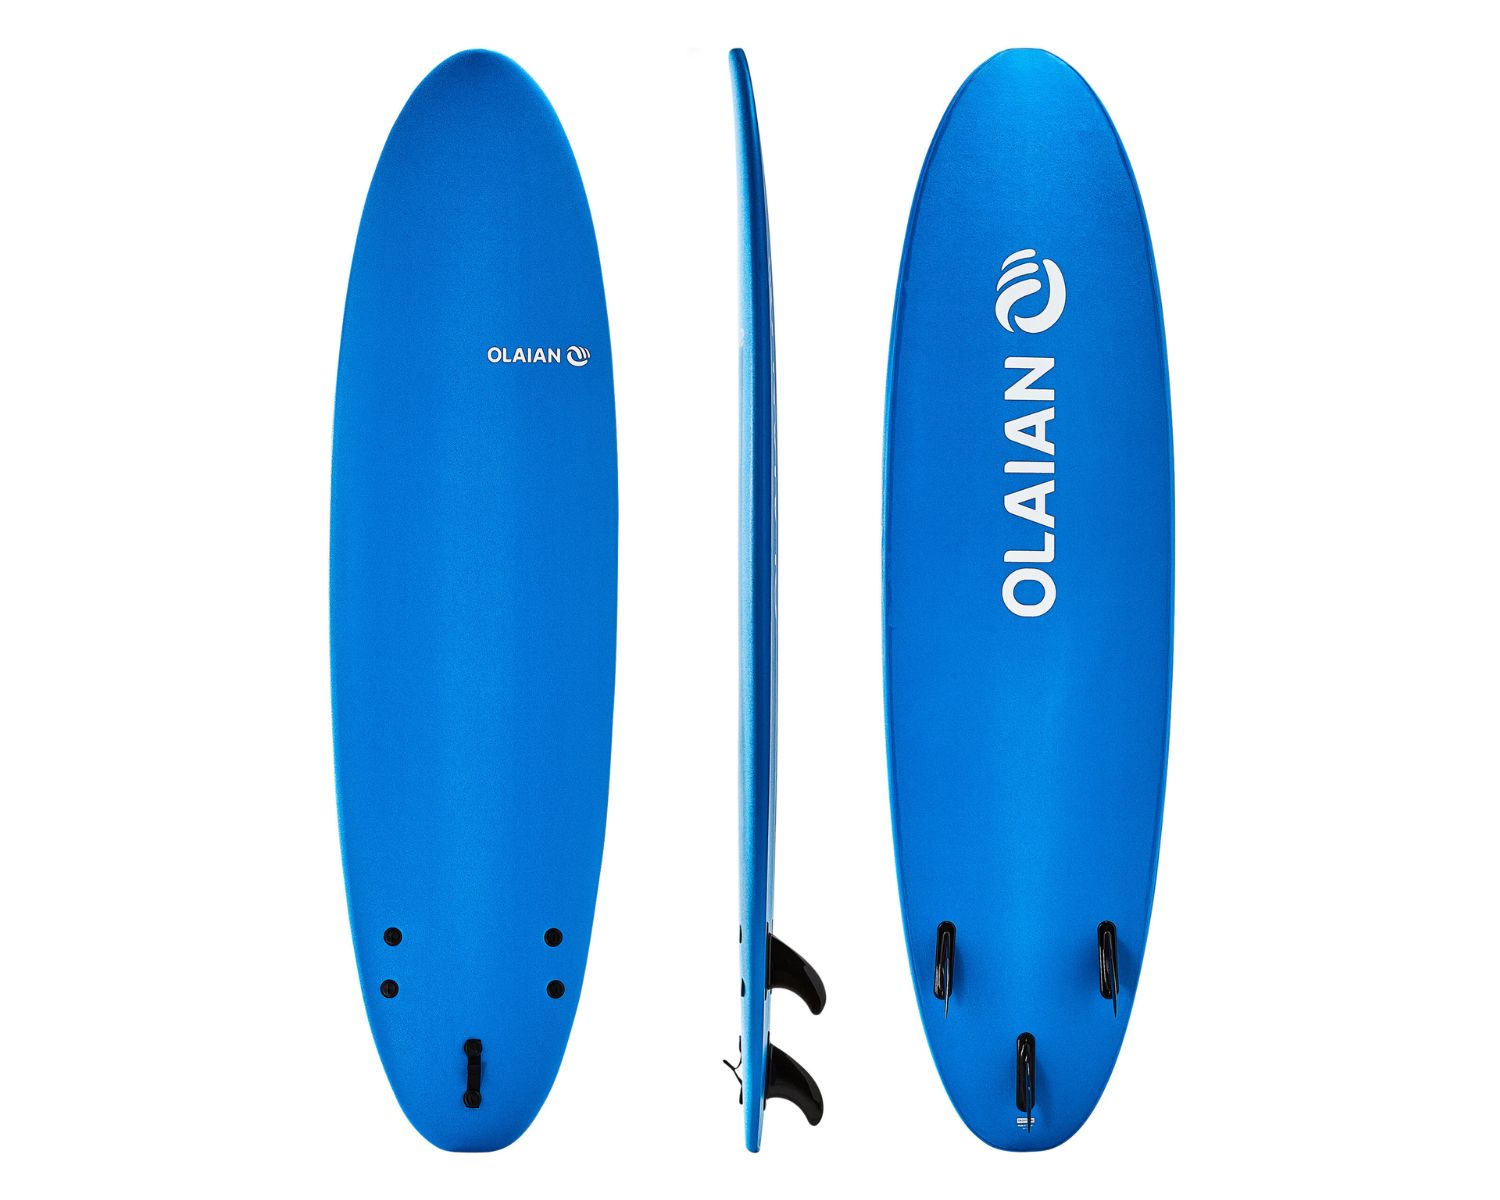 Surfboard Review: Unbiased Analysis and Recommendations